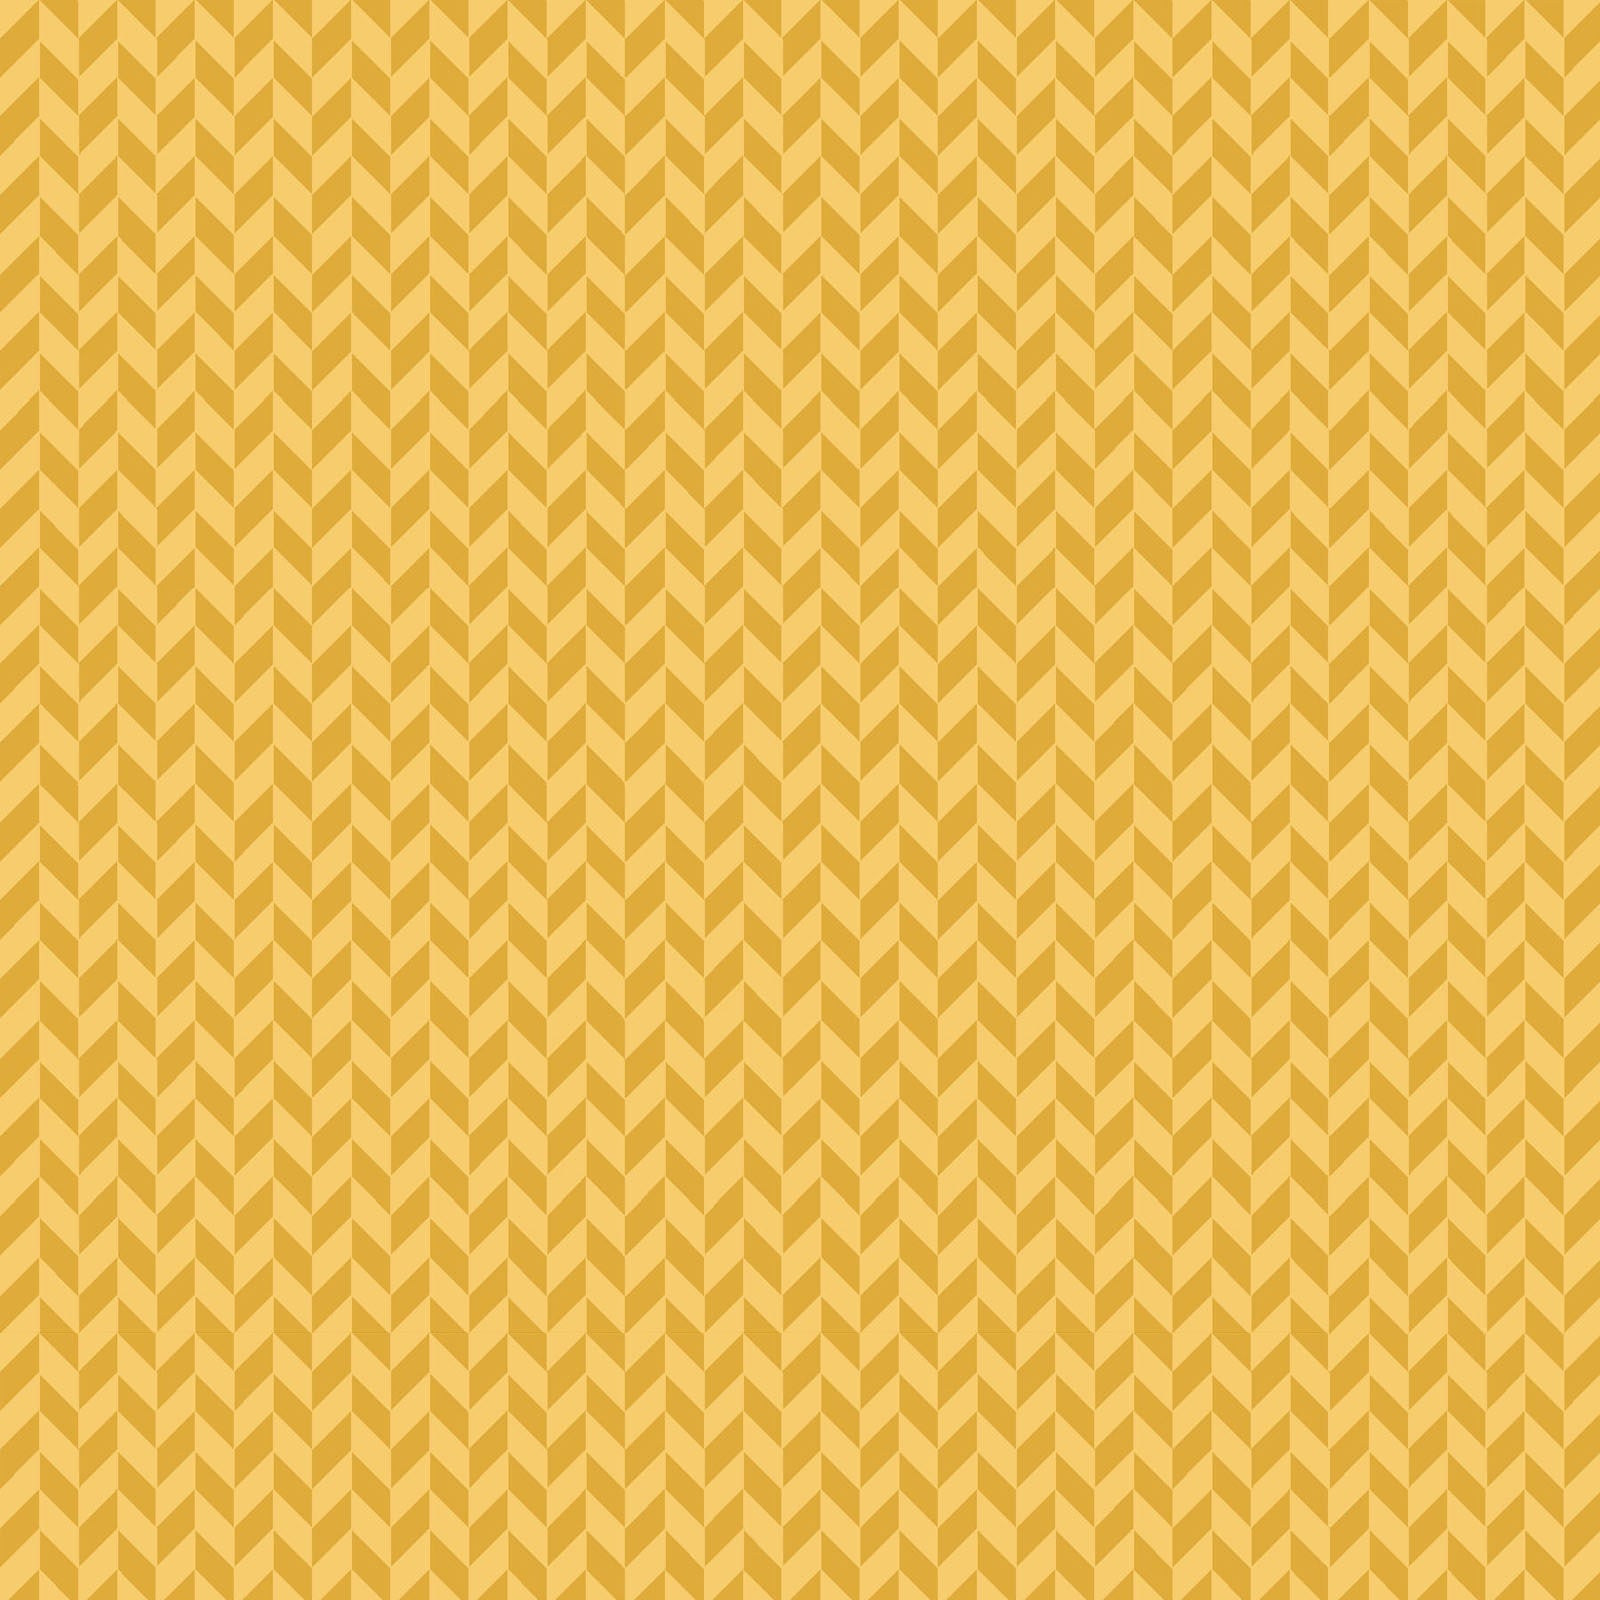 Herringbone in gold (MAS9397-S) is part of the Kimberbell Basics line designed by Kim Christopherson for Maywood Studio. This fabric features a two-tone gold herringbone and adds a sophisticated texture to projects. 